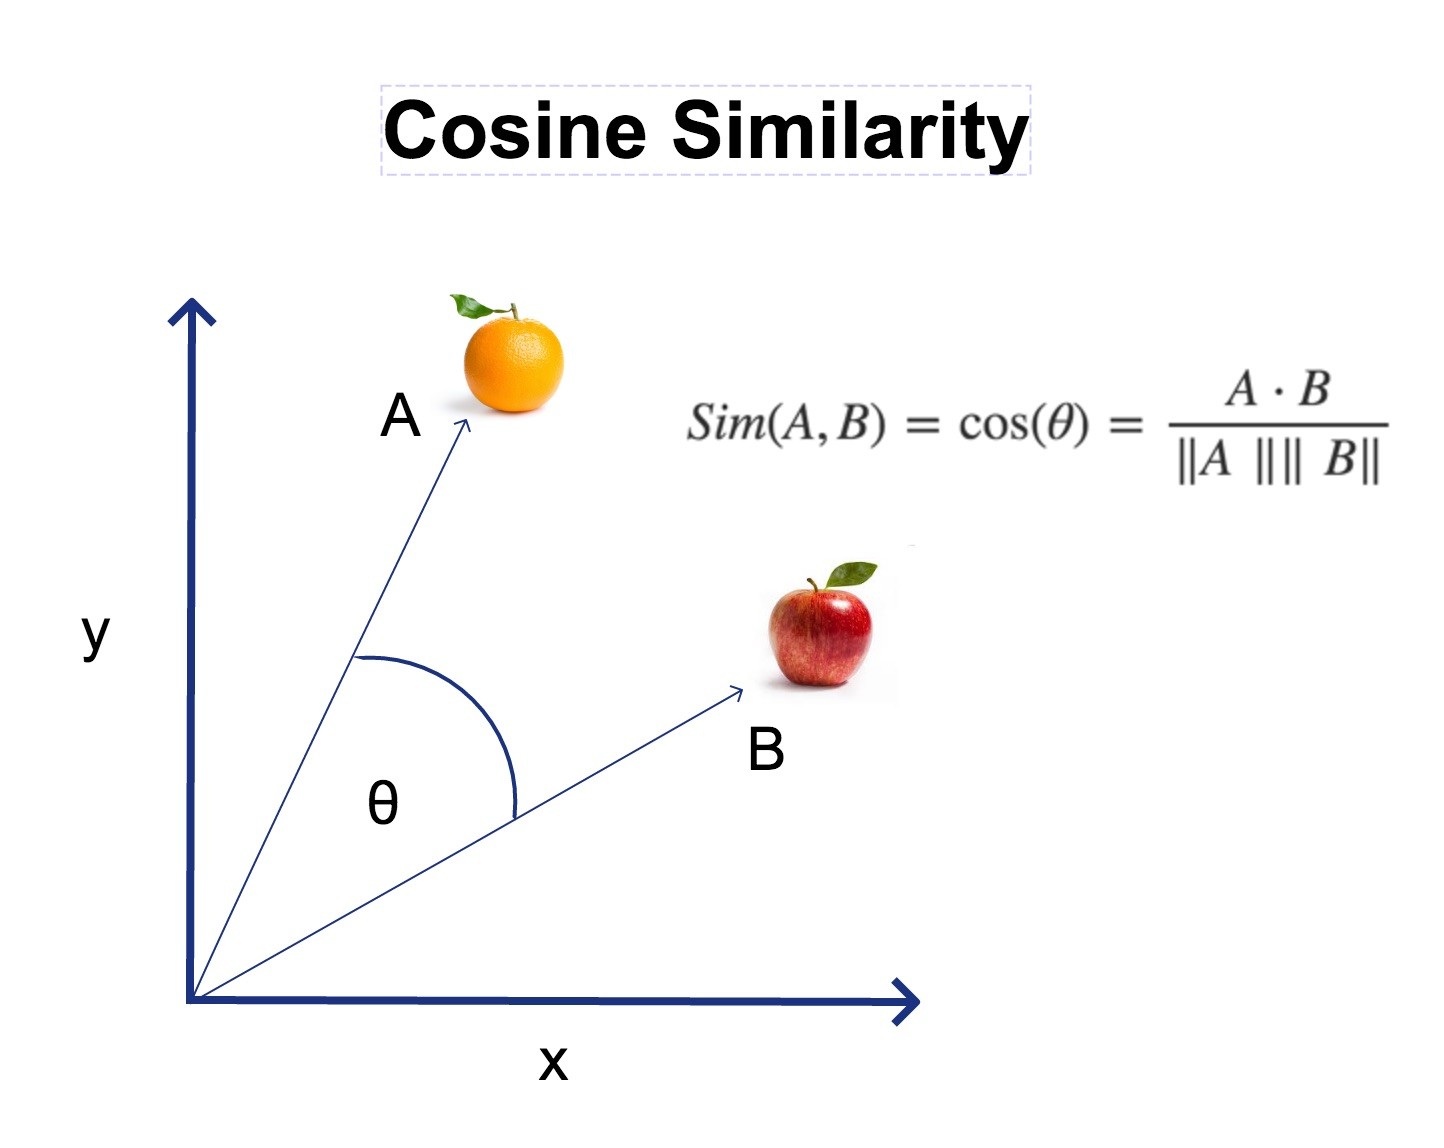 How Cosine Similarity Can Improve Your Machine Learning Models